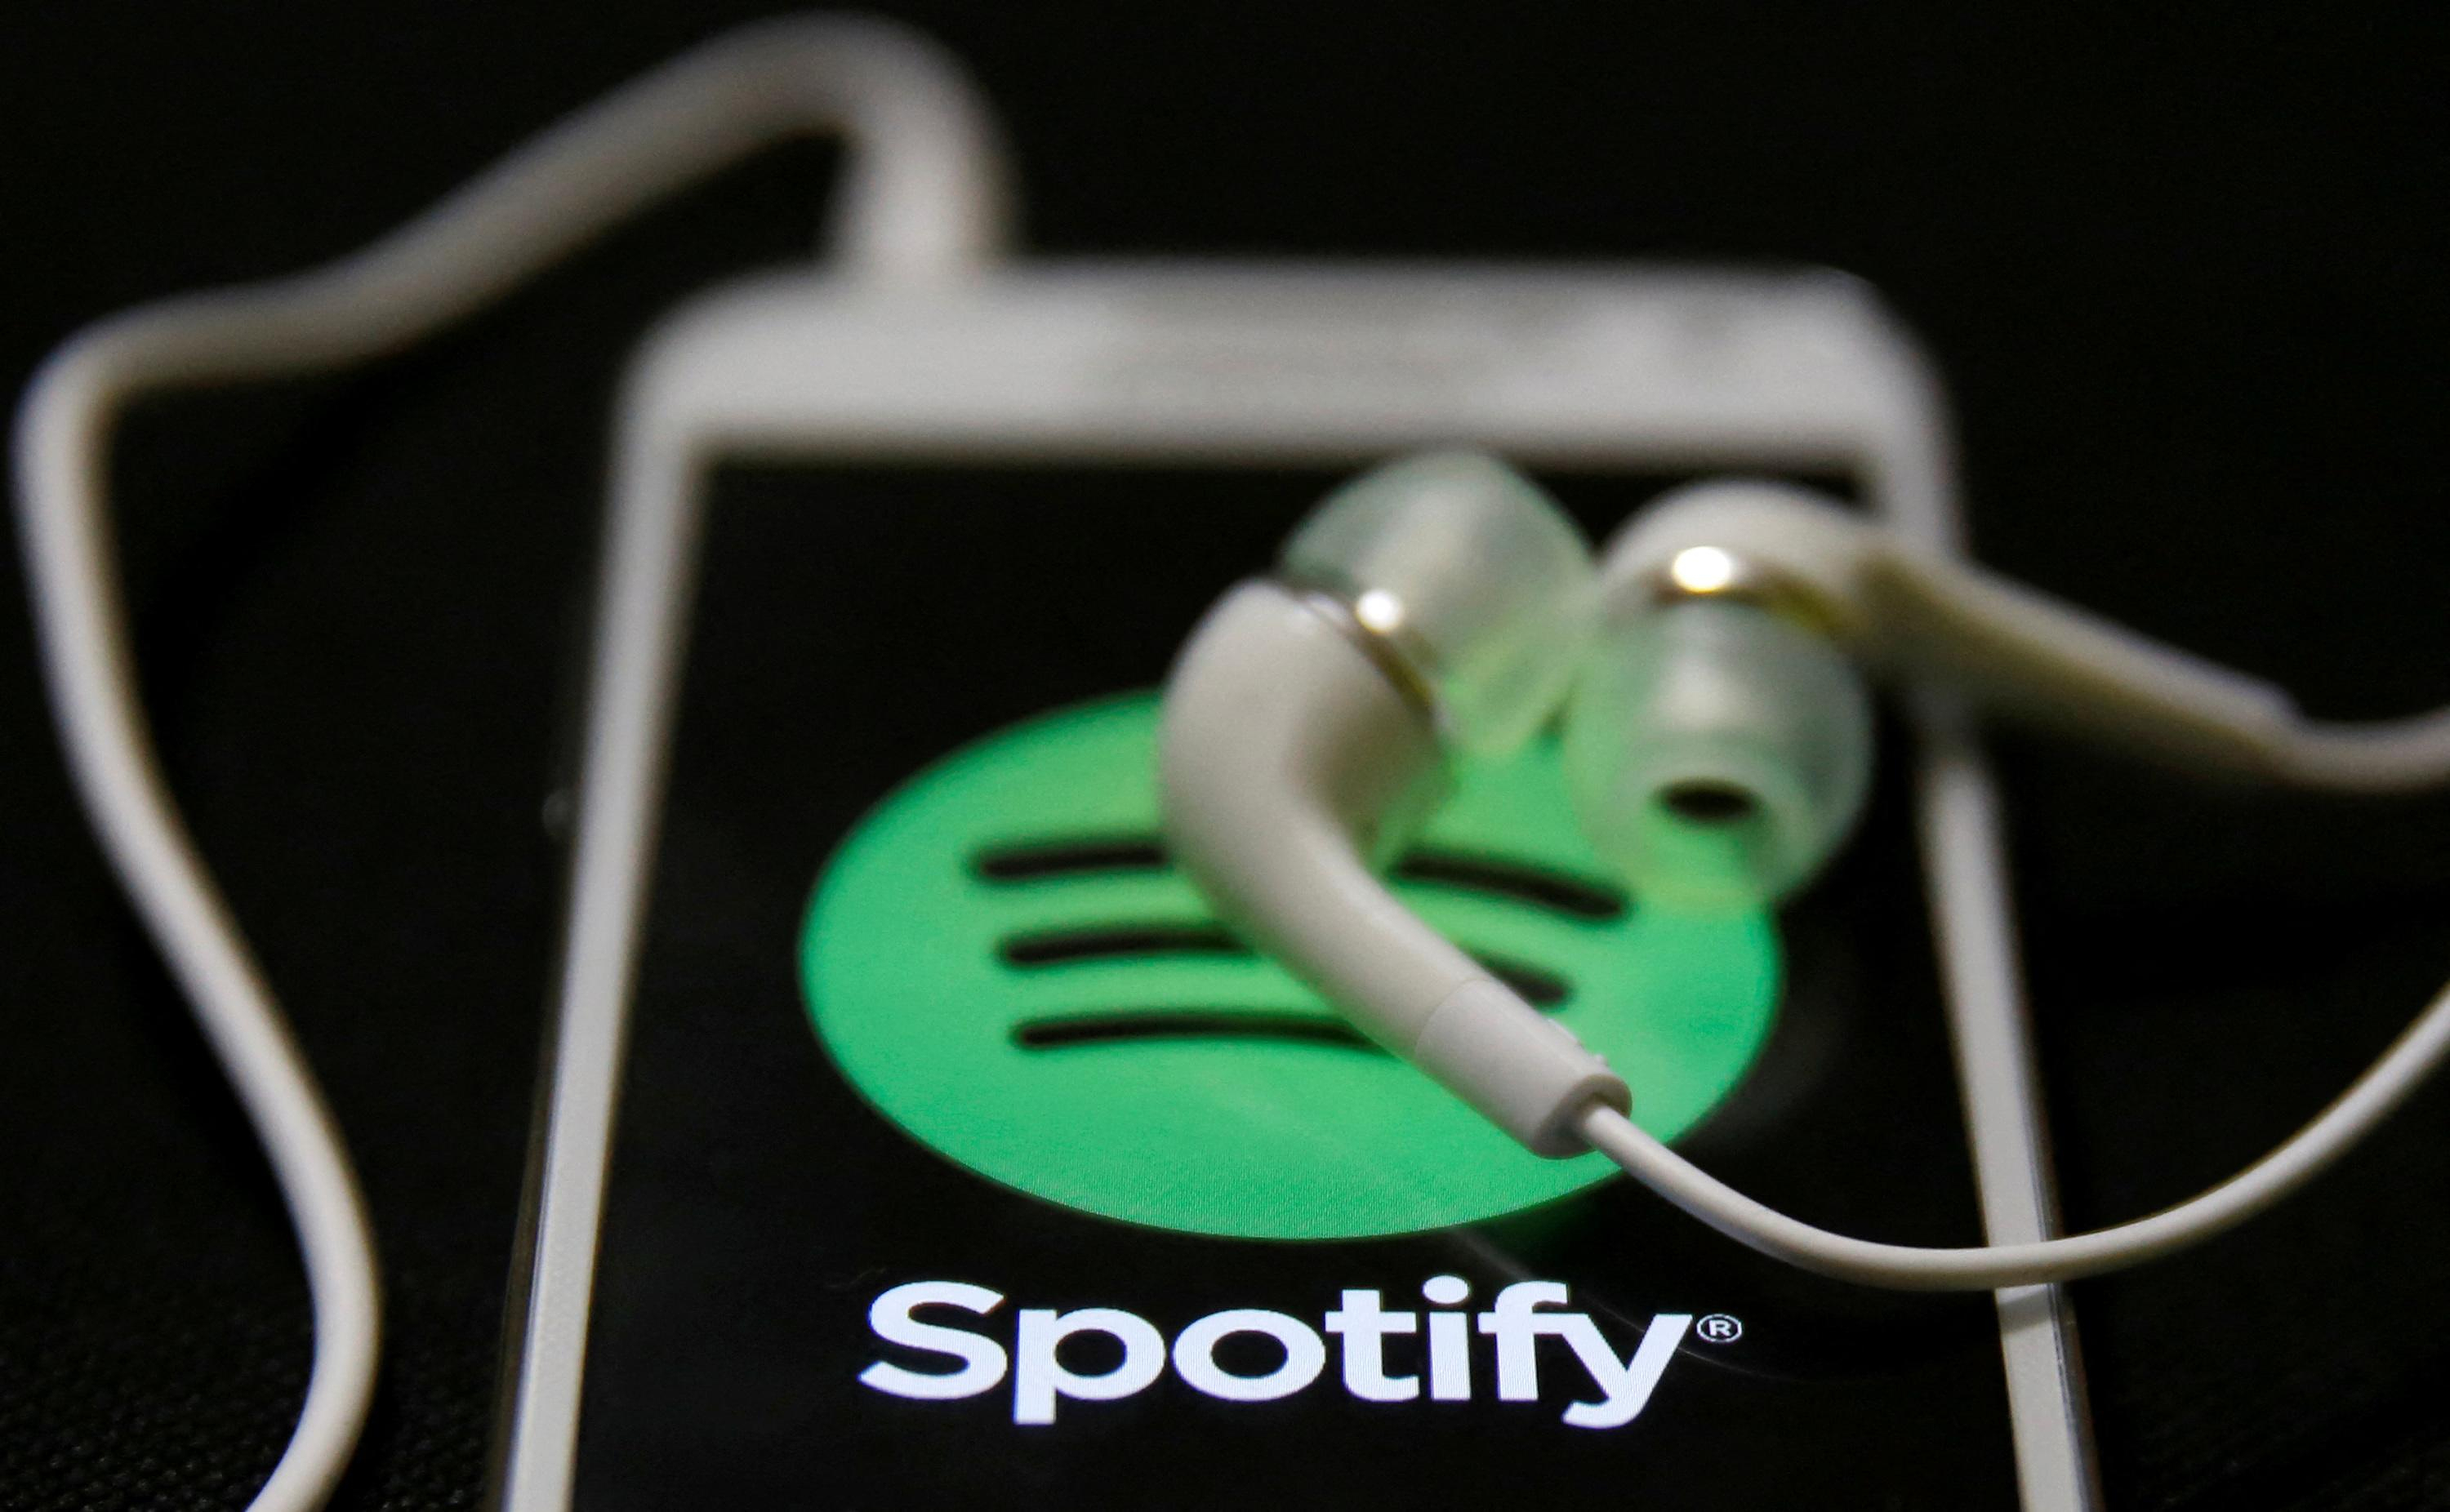 In search of profitability, Spotify cuts one in six jobs